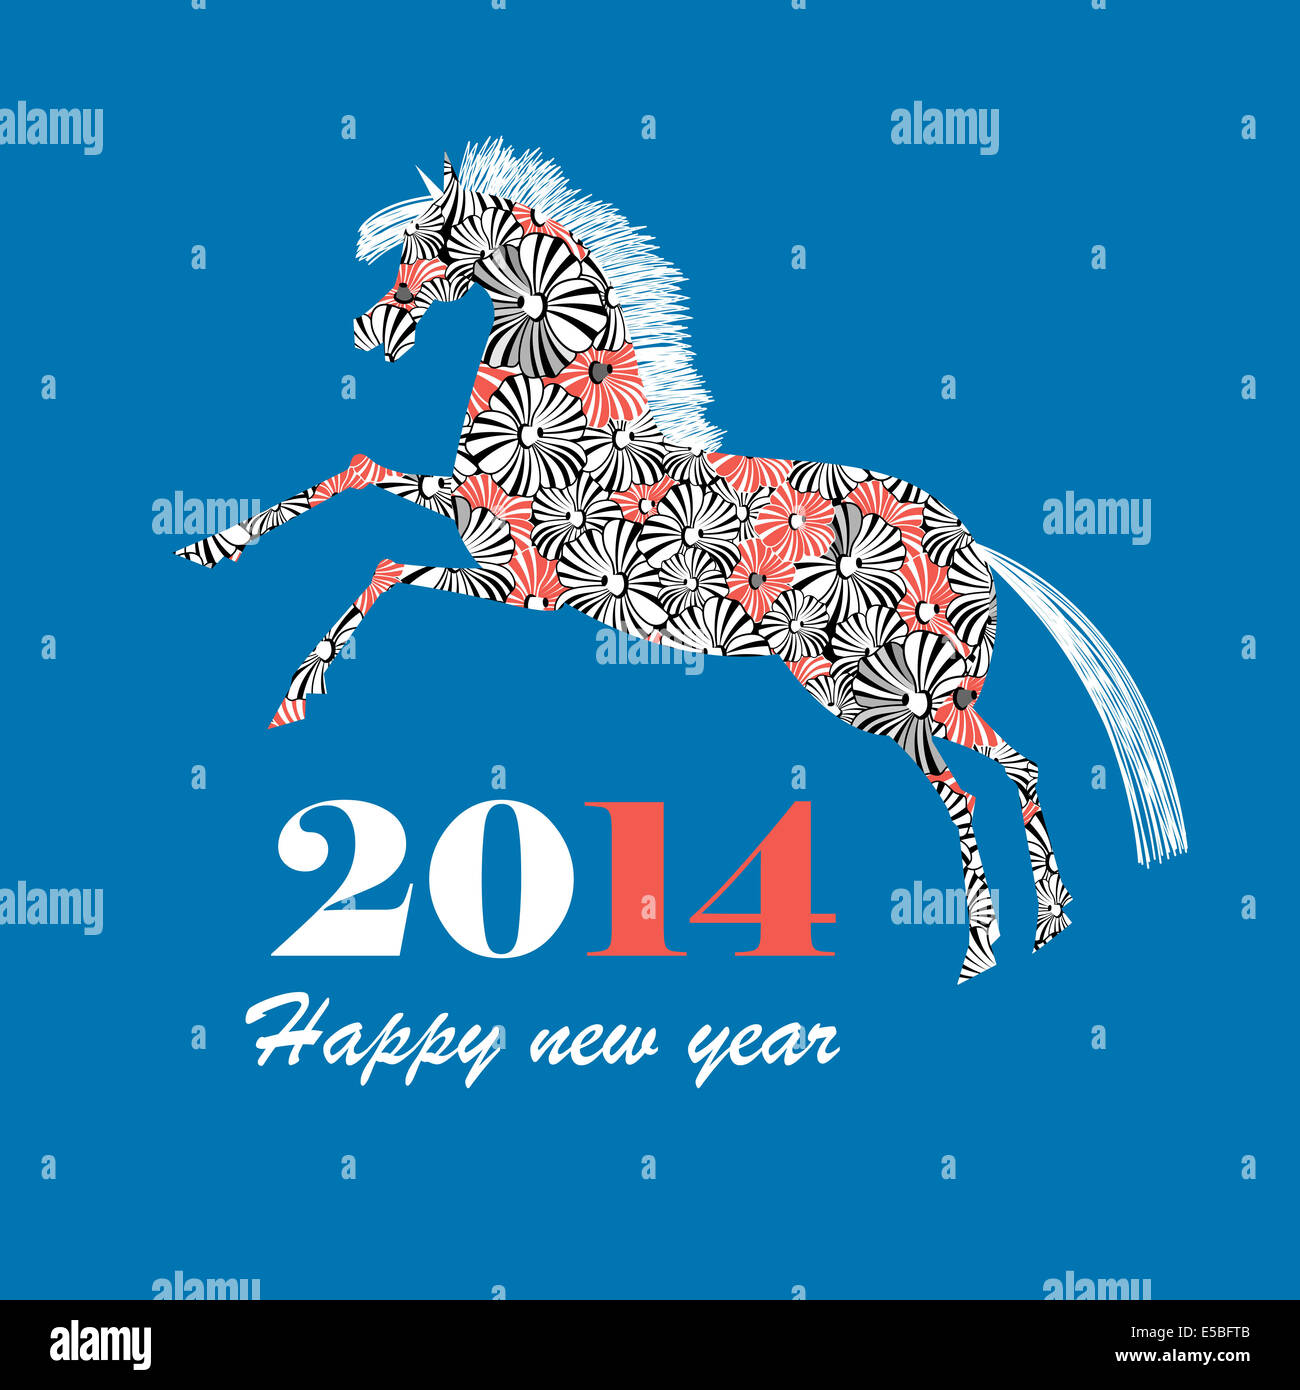 Christmas greeting card with ornamental horse on a blue background Stock Photo